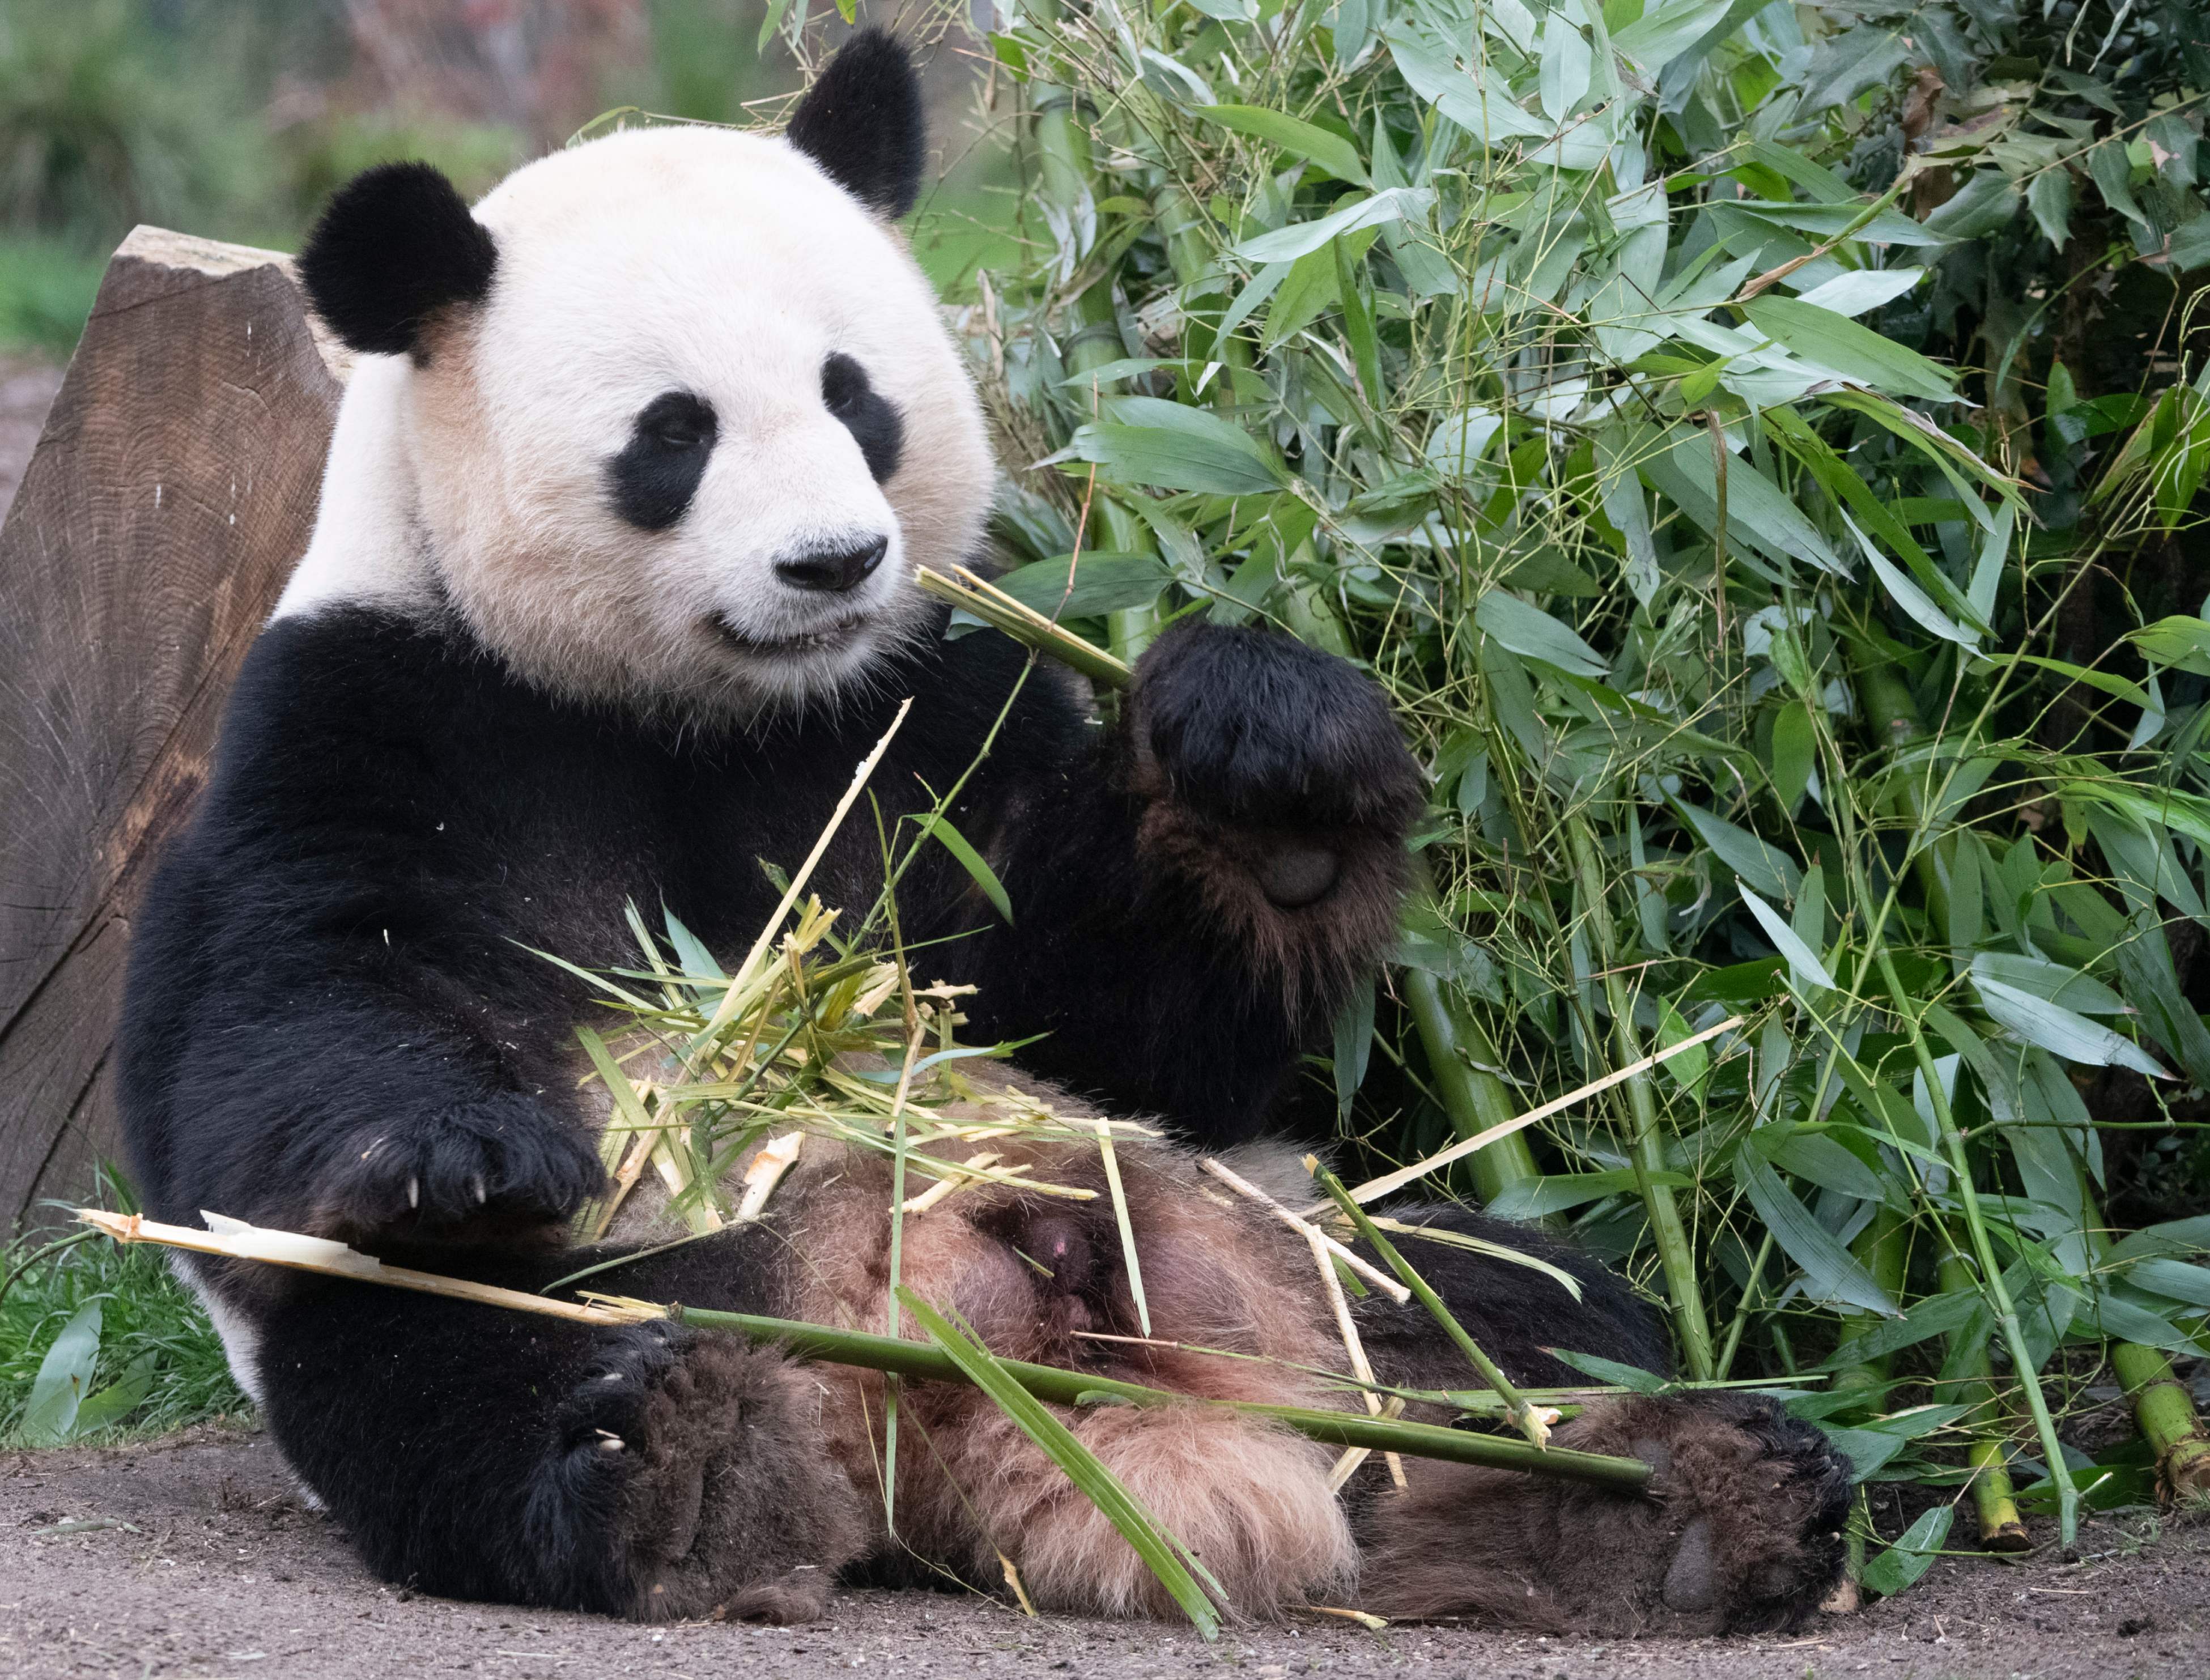 Male giant panda Jiao Qing nibbles a bamboo twig on April 5, 2019 at the Zoologischer Garten zoo in Berlin. (Photo by Paul Zinken / dpa / AFP) / Germany OUT